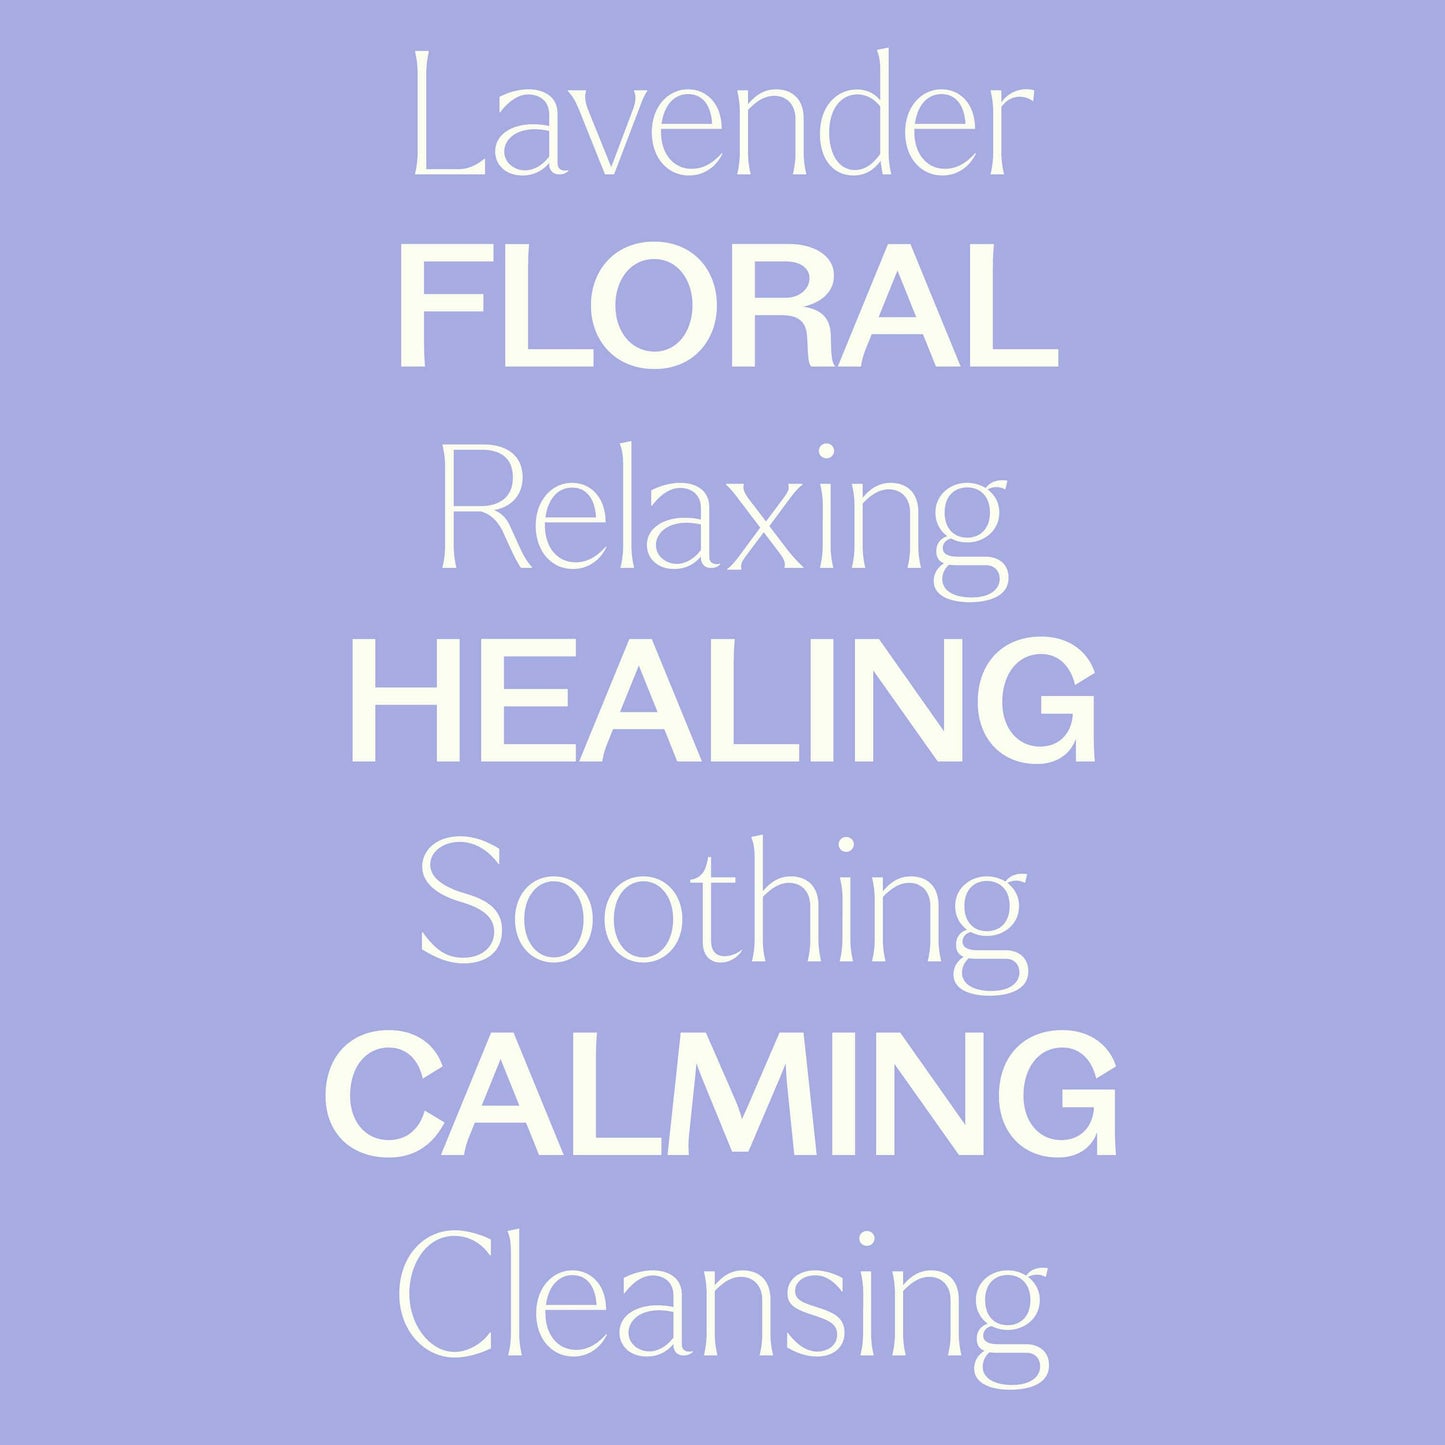 Lavender Body Oil is floral, relaxing, healing, soothing, calming and cleansing